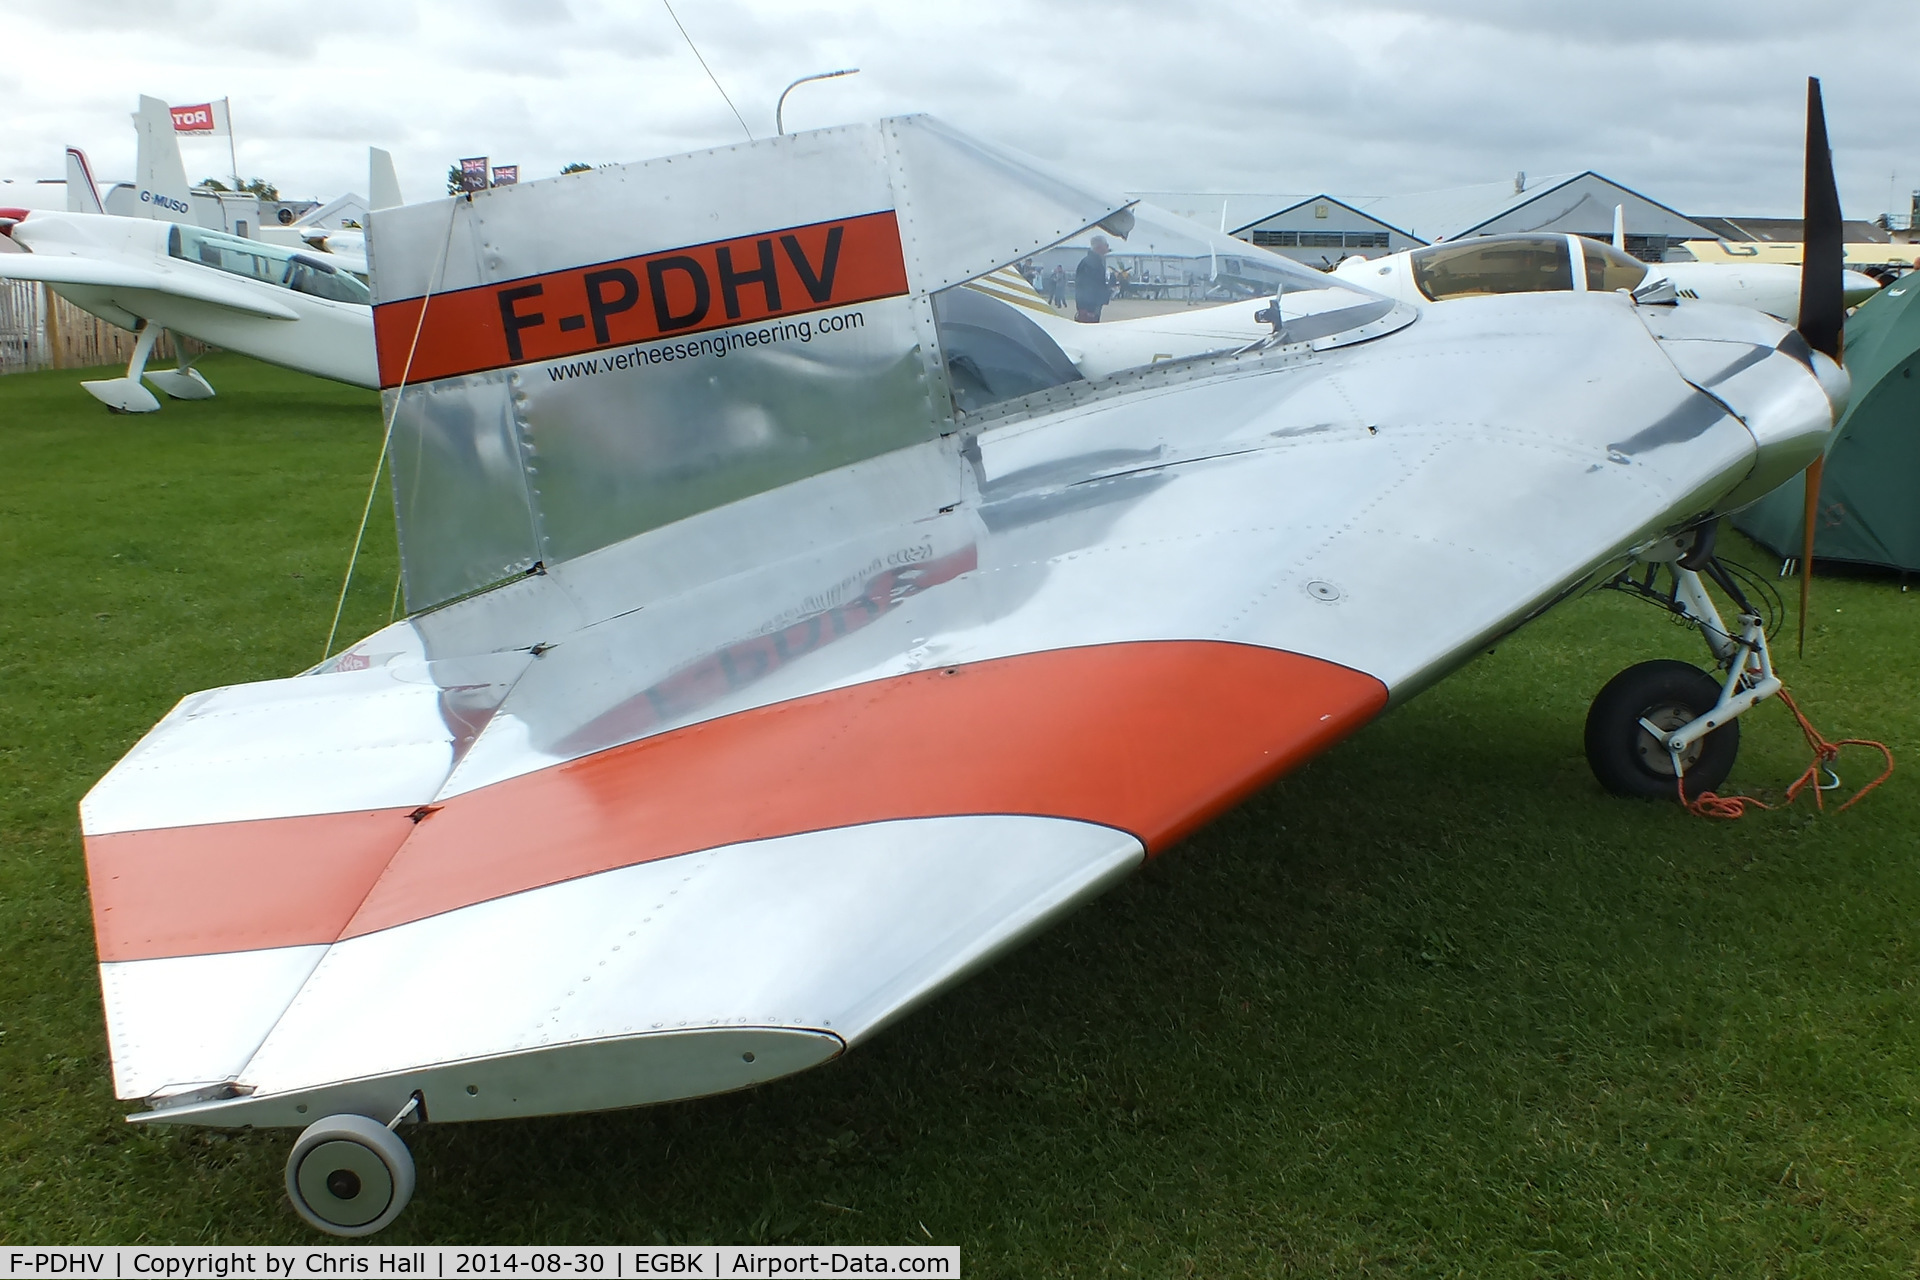 F-PDHV, 2004 Verhees Delta C/N 01, at the LAA Rally 2014, Sywell